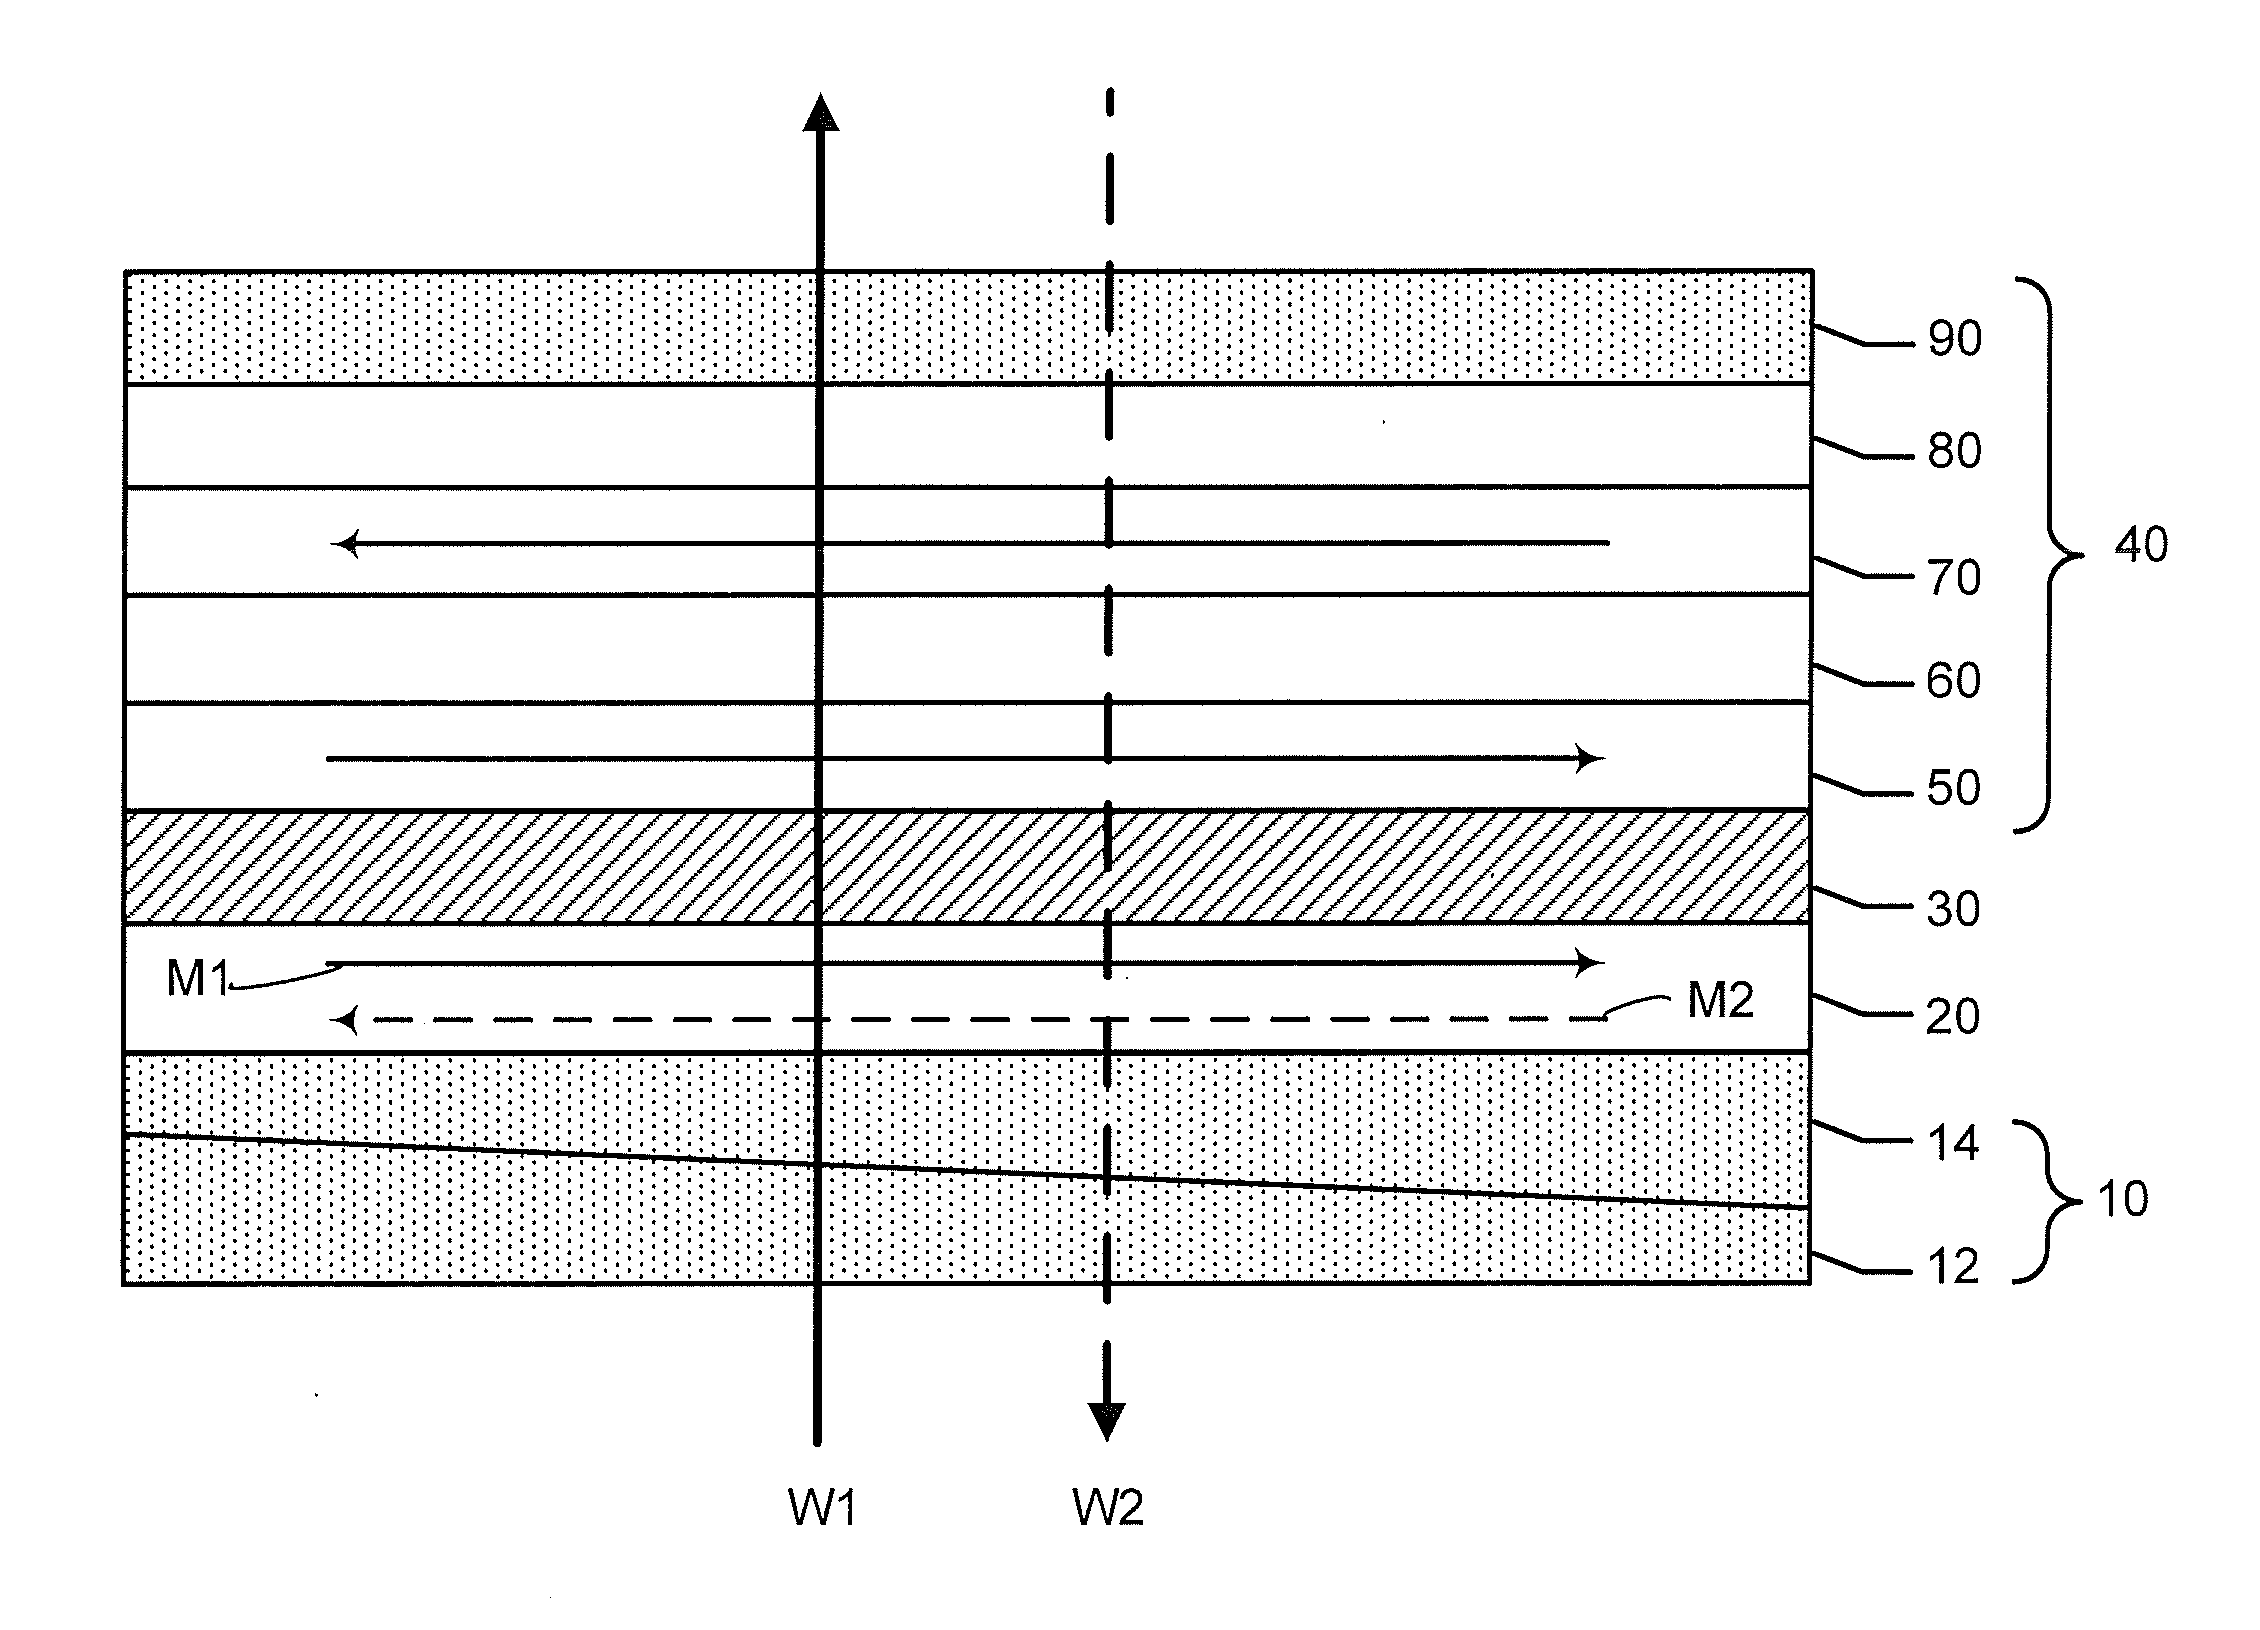 Magnetic tunnel junction devices having magnetic layers formed on composite, obliquely deposited seed layers